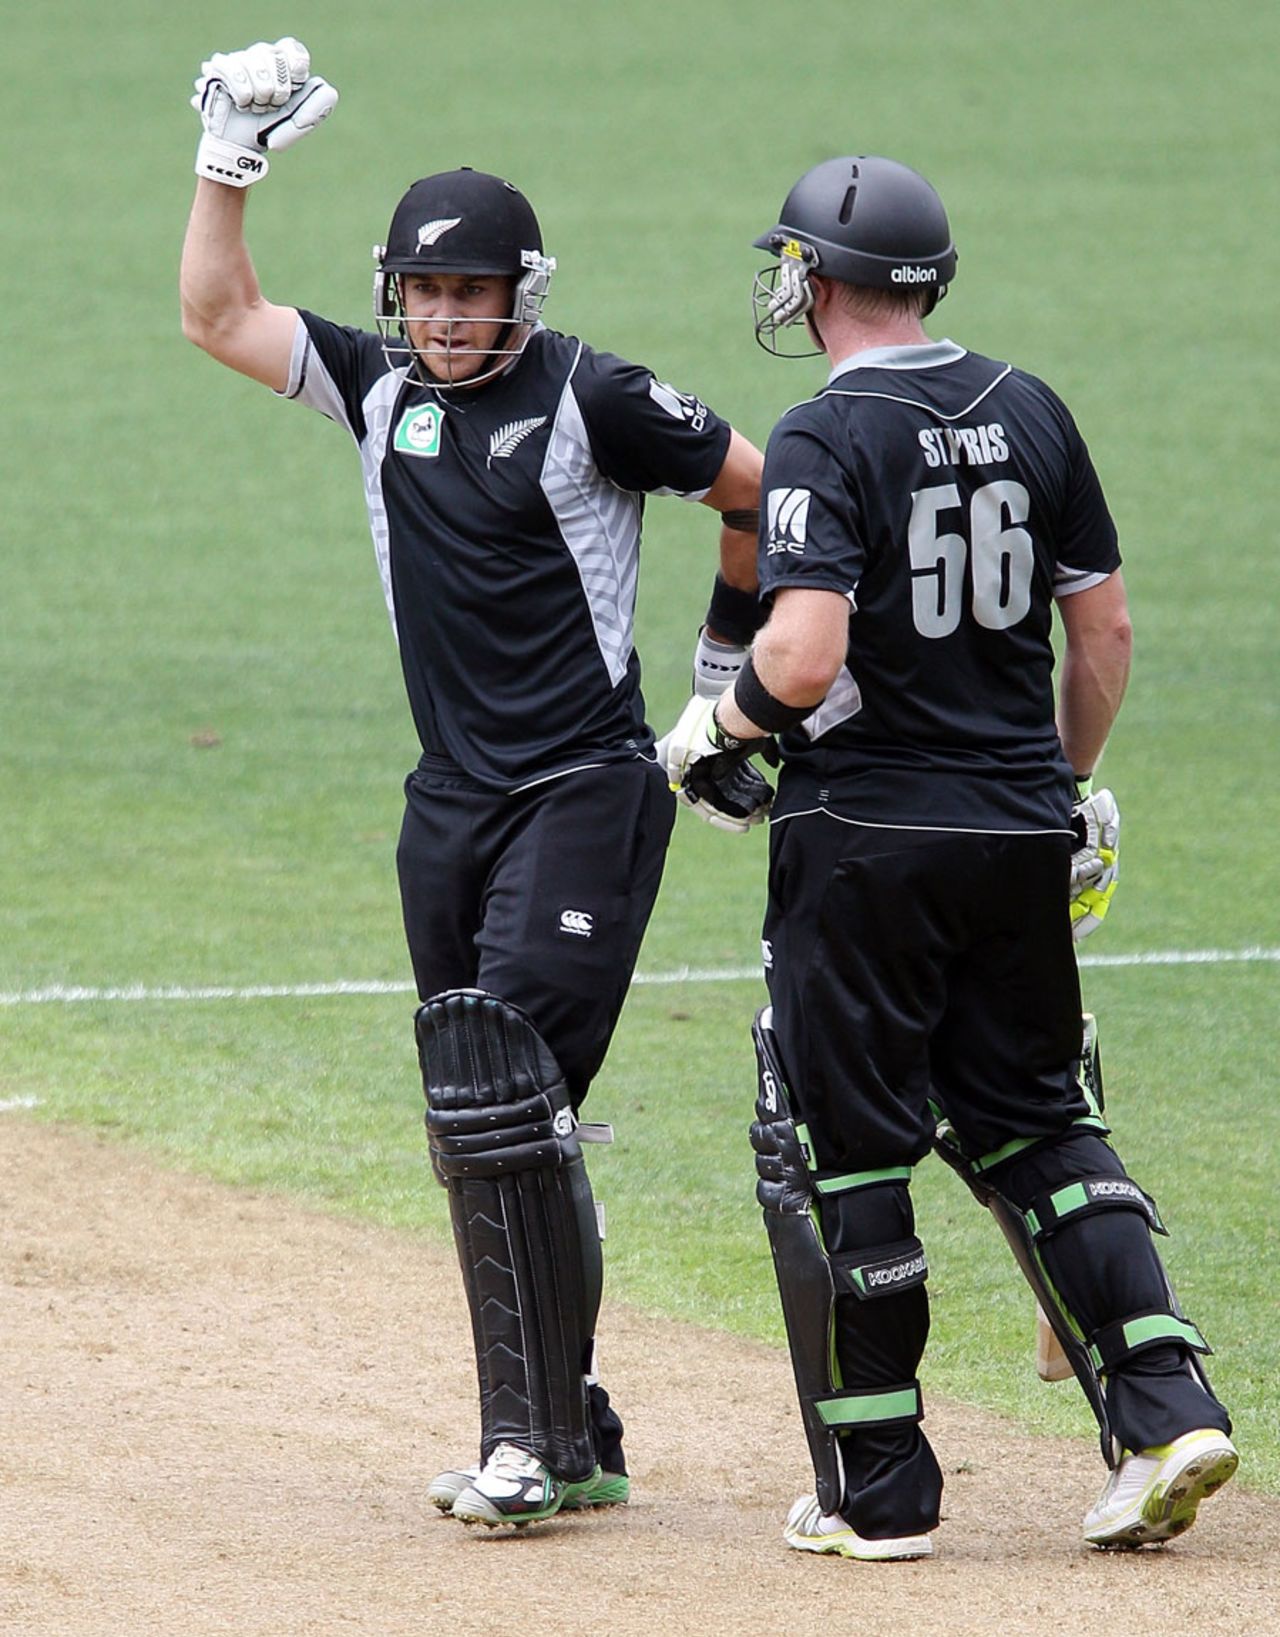 Nathan McCullum and Scott Styris added 120 runs in 14 overs, New Zealand v Pakistan, 6th ODI, Auckland, February 5, 2011